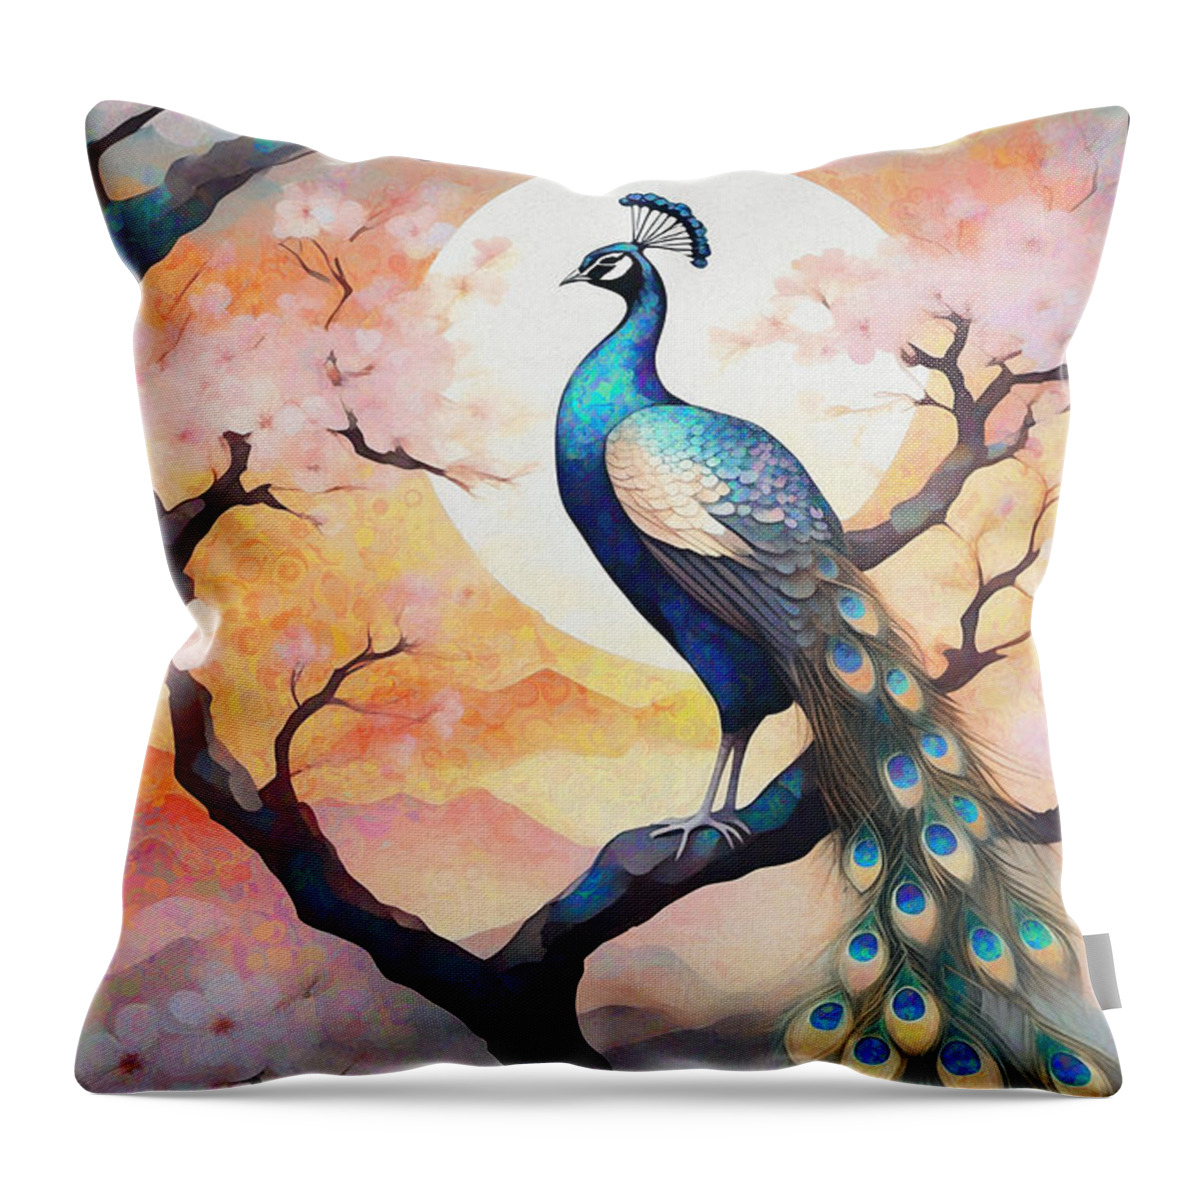 Abstract Throw Pillow featuring the digital art Colourful Peacock Abstract - 02734 by Philip Preston